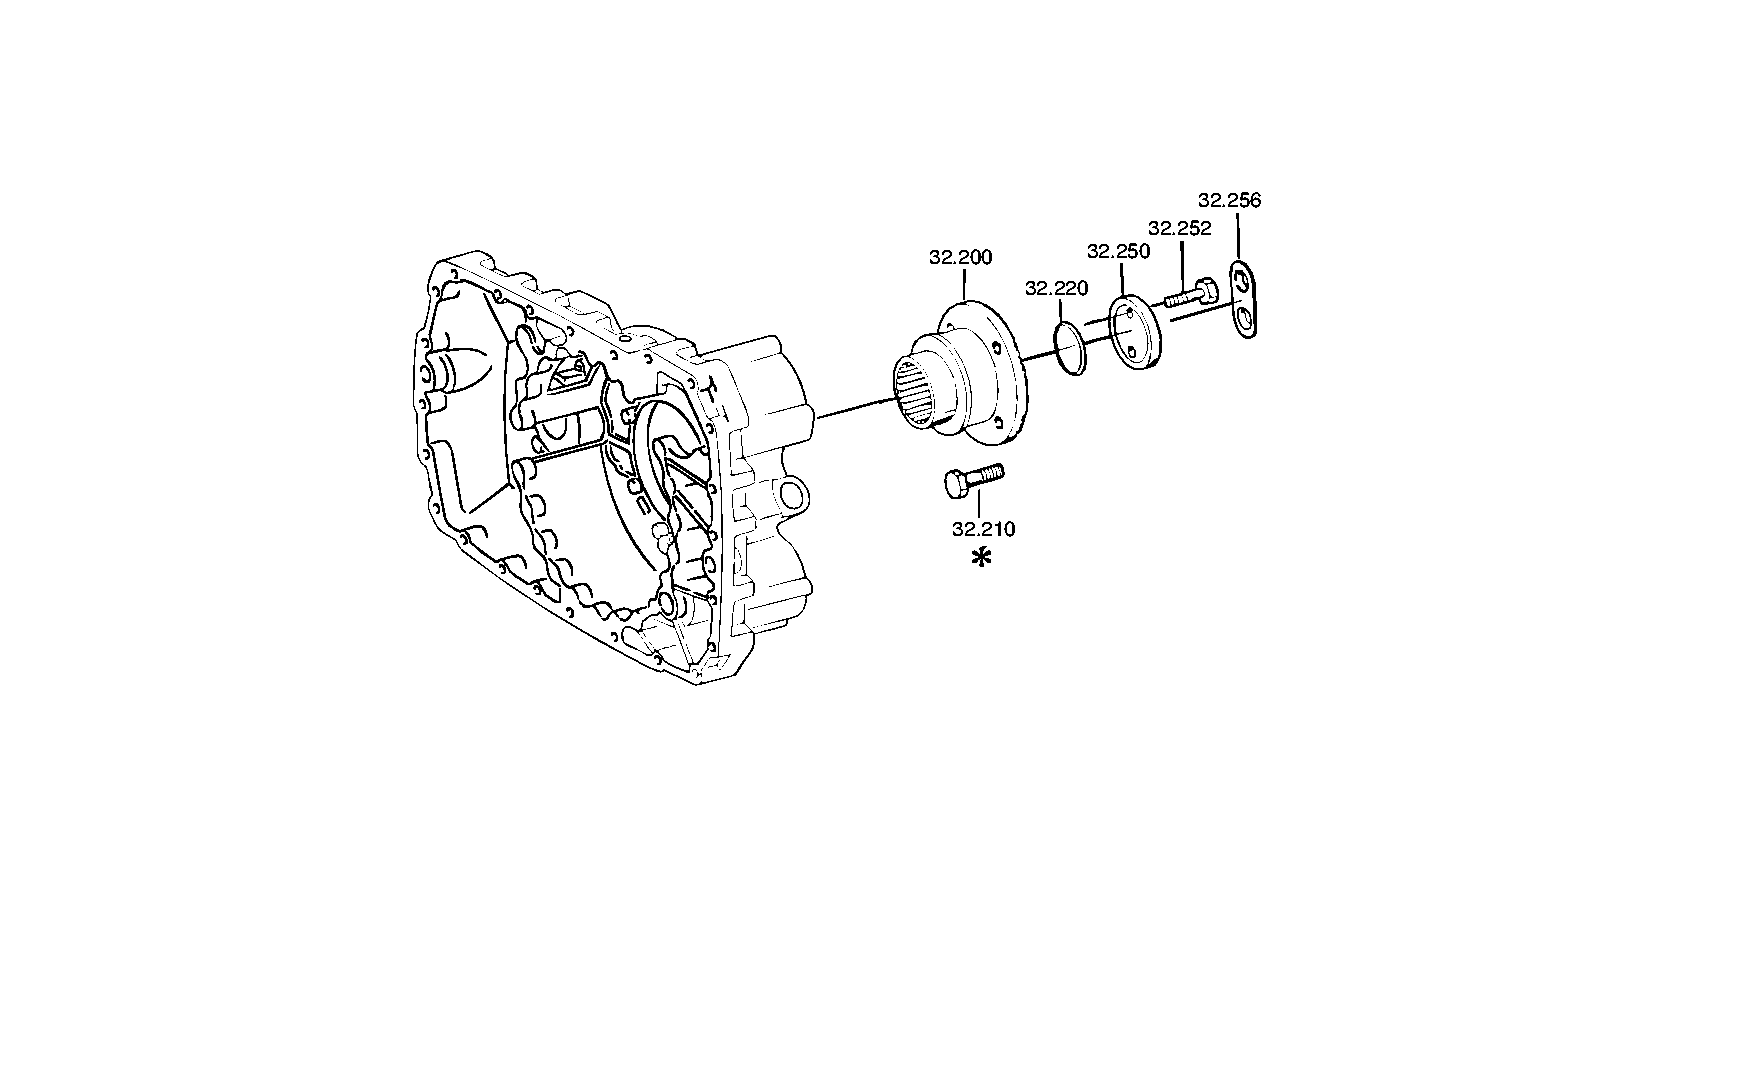 drawing for BAOTOU BEIFANG BENCHI HEAVY DUTY TRUCK A0002640844 - OUTPUT FLANGE (figure 2)